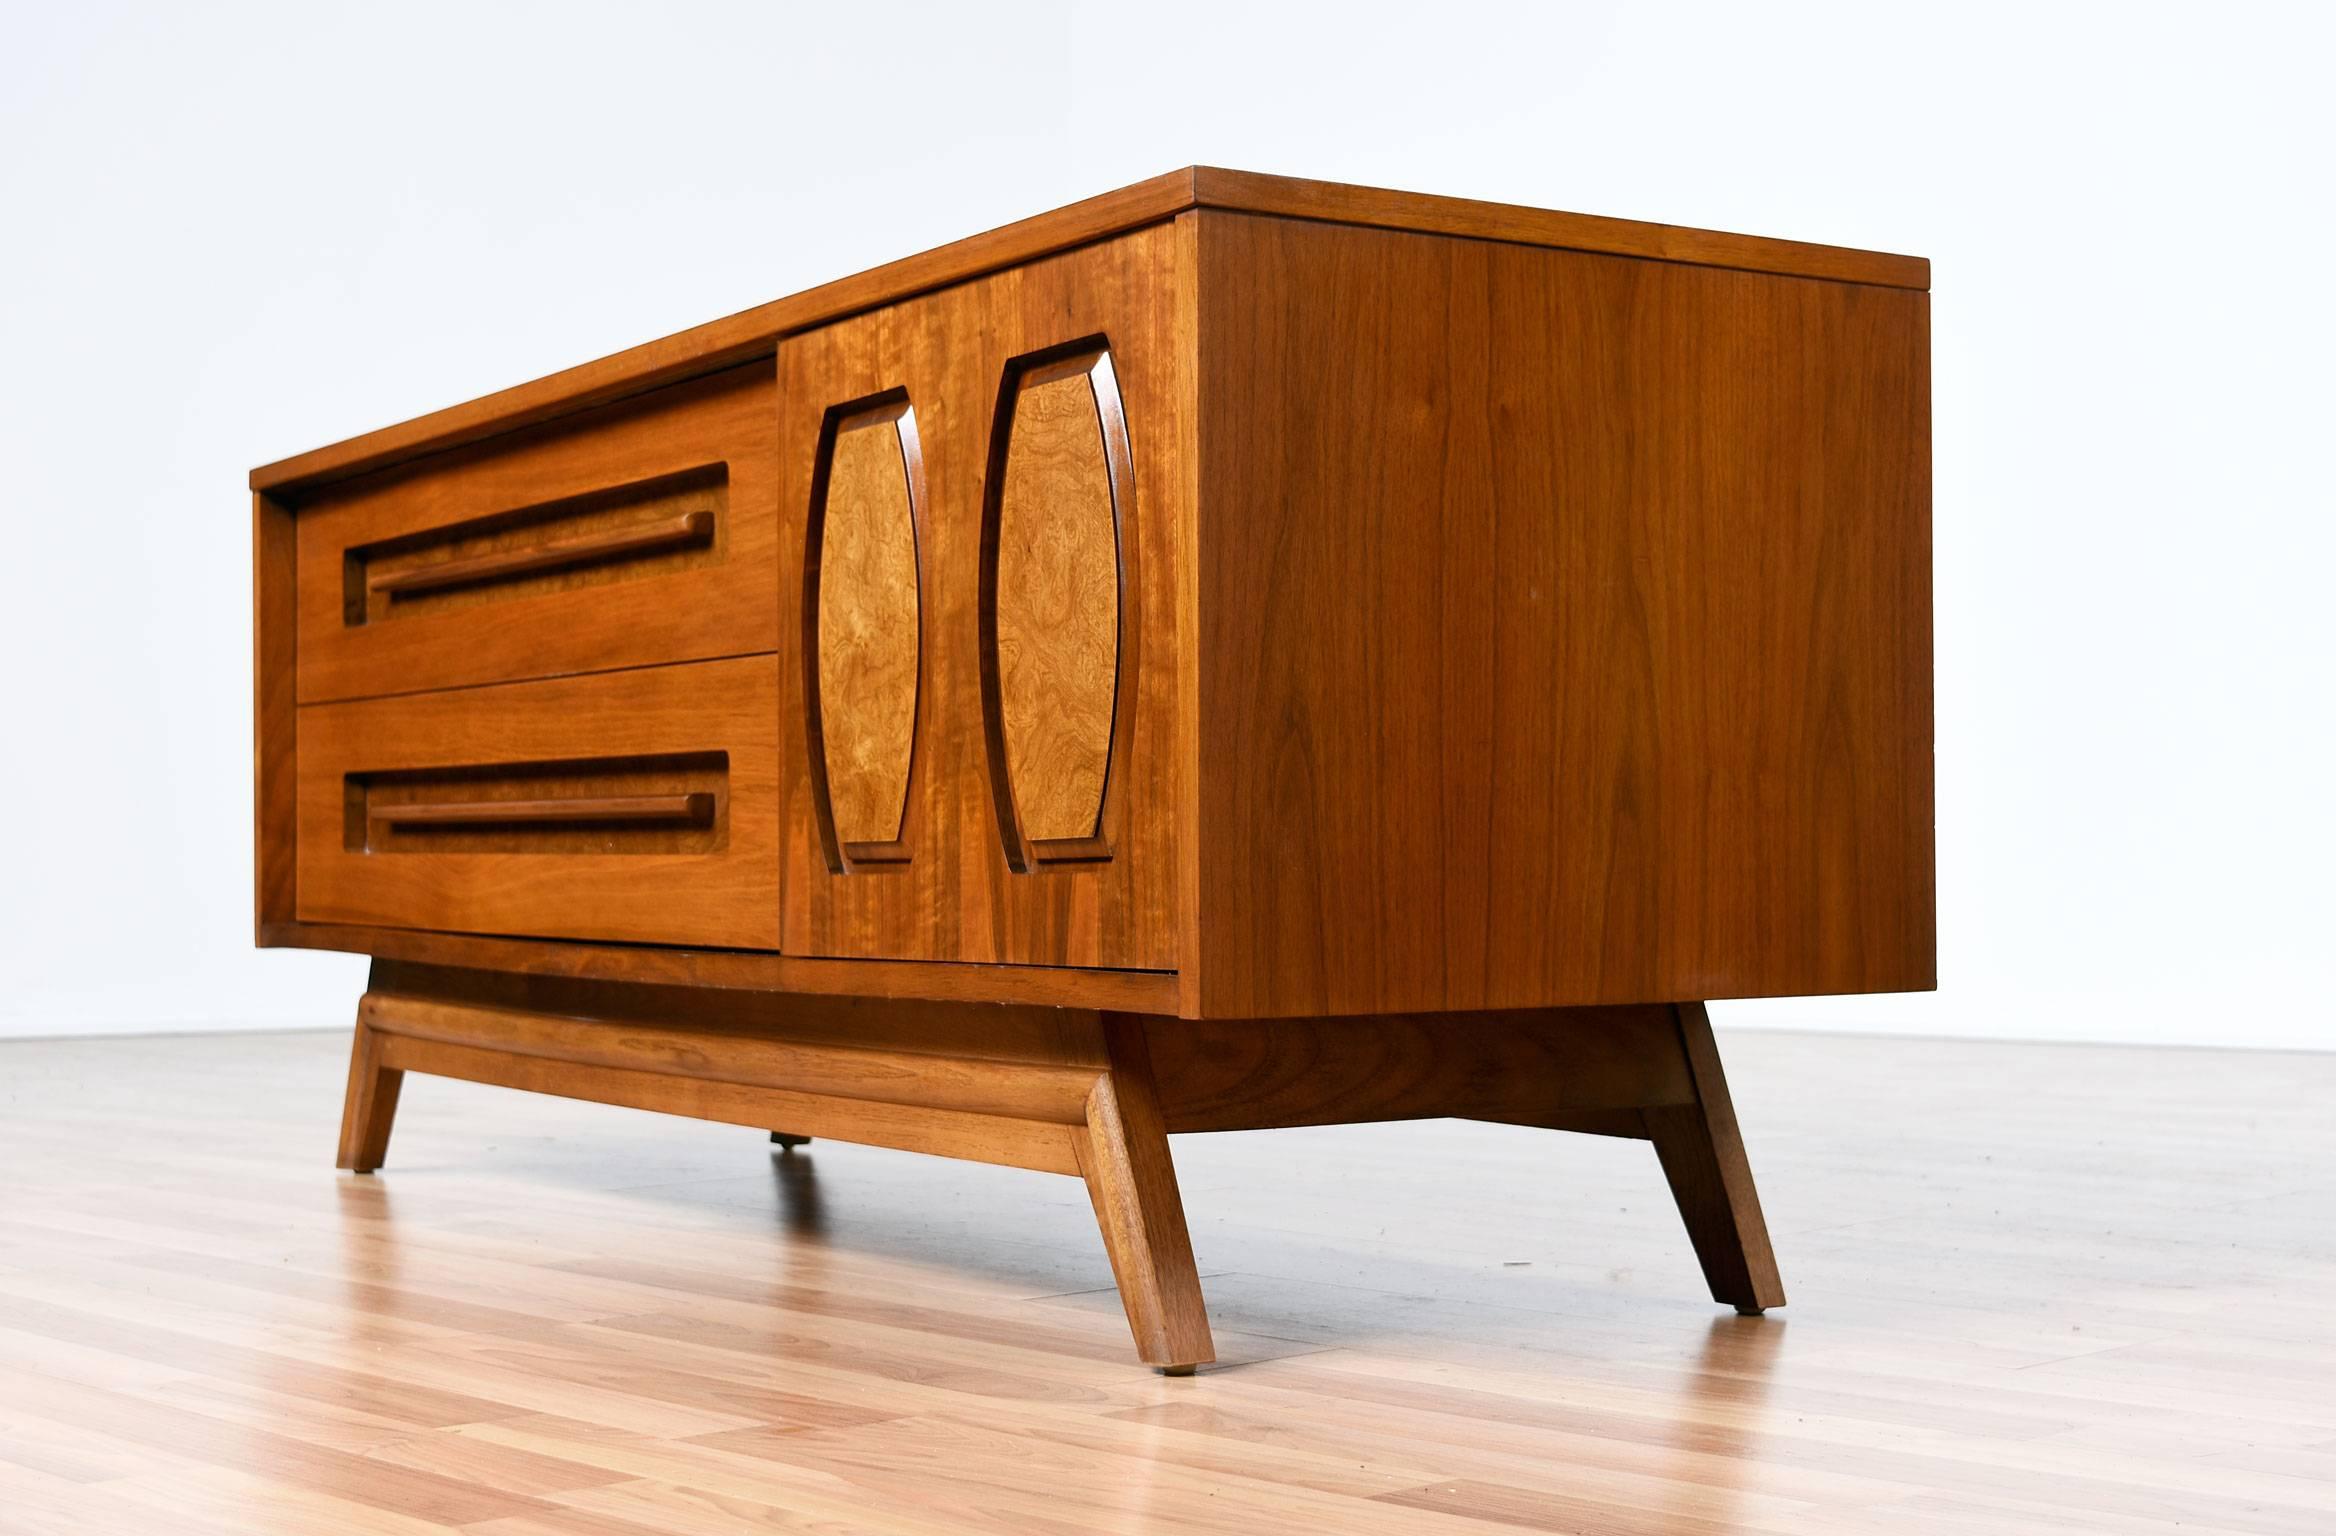 This beautifully detailed low profile Mid-Century Modern dresser is made by Young Furniture in the 1960s. This exquisite dresser is made of walnut with burl accents around the solid walnut sculpted drawer pulls and sculpted relief embellishment on